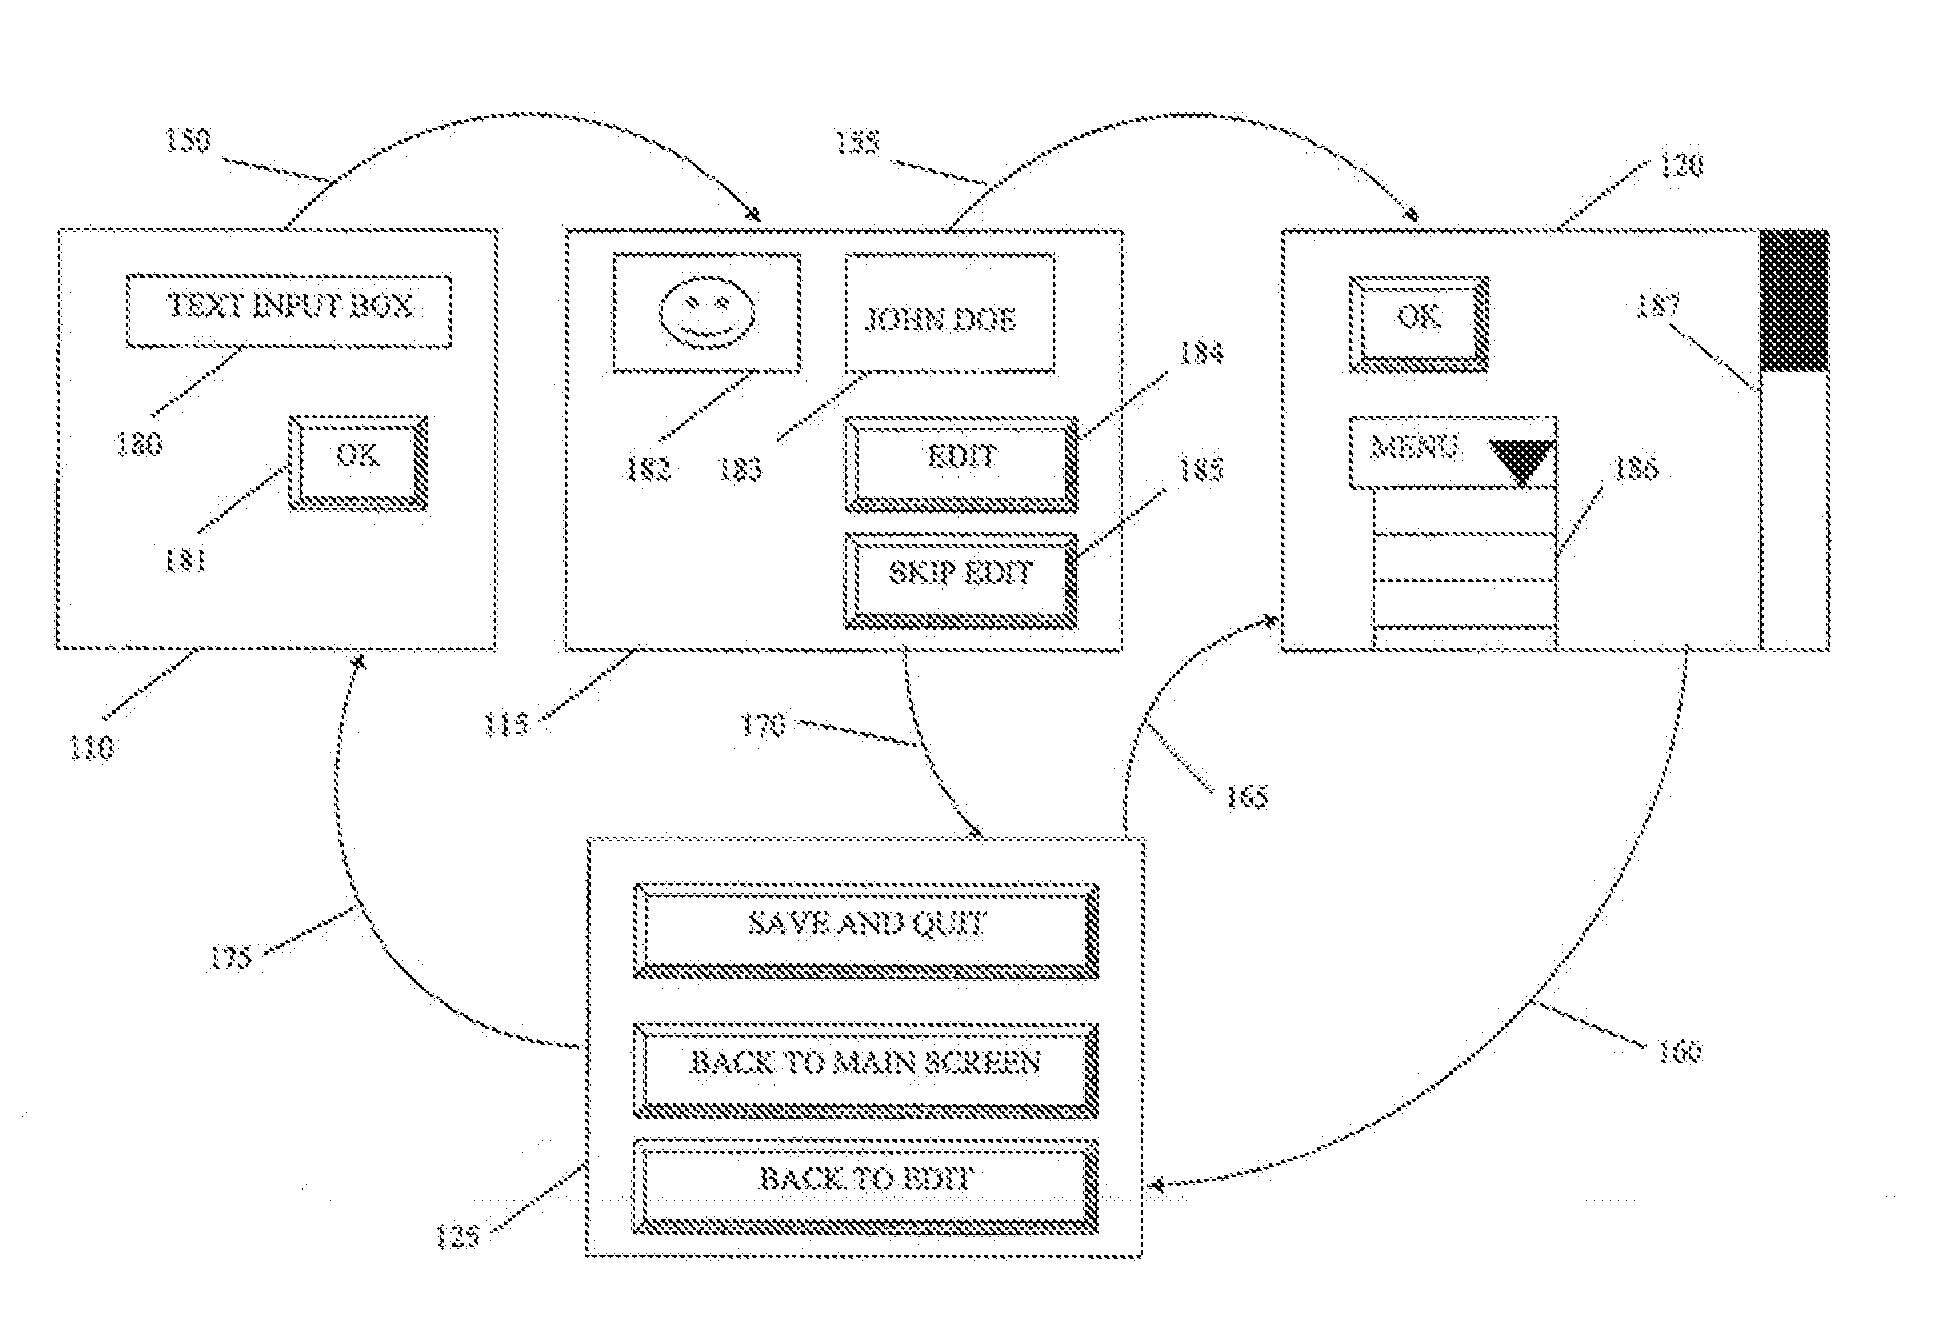 System and method for visual matching of application screenshots